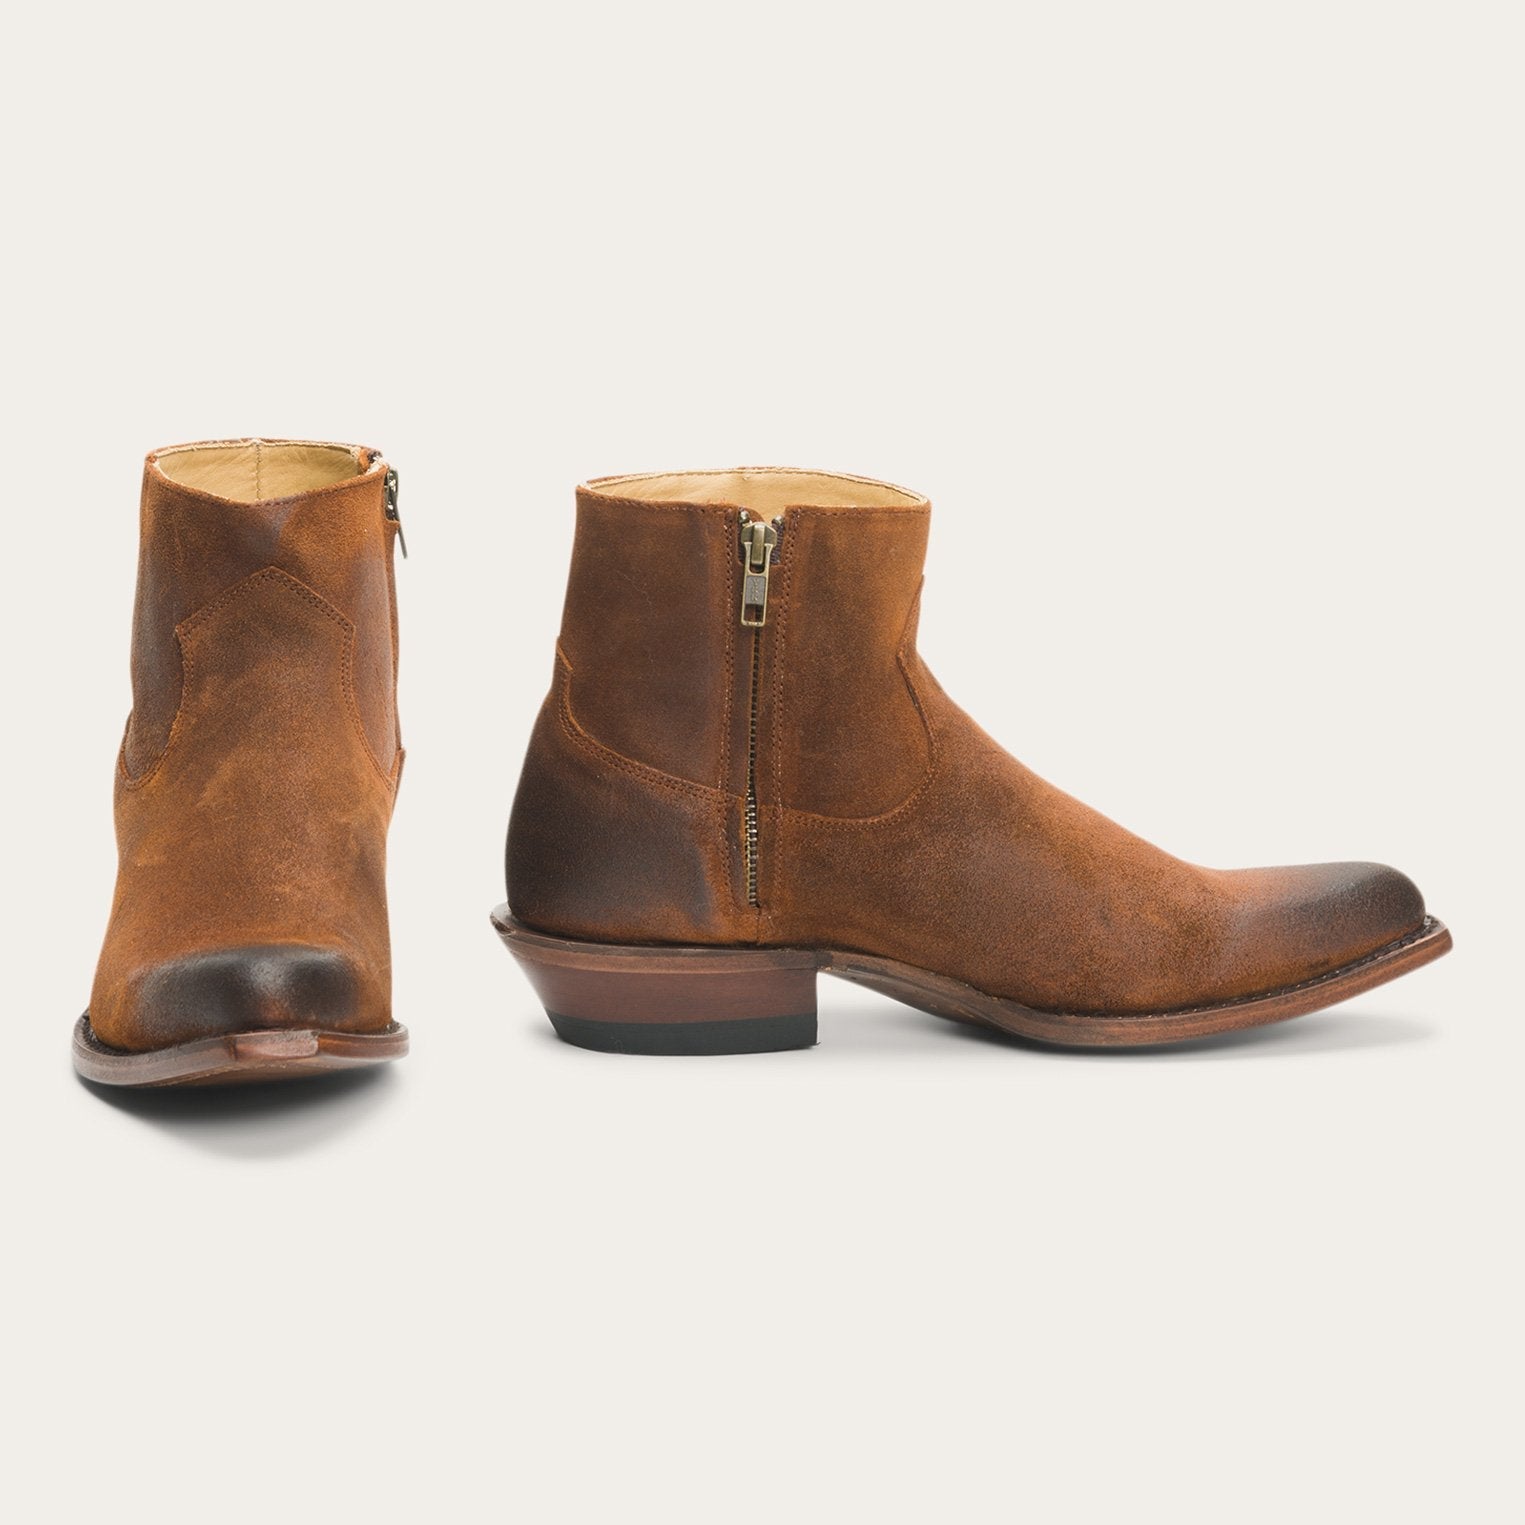 Stetson Cleo Boots